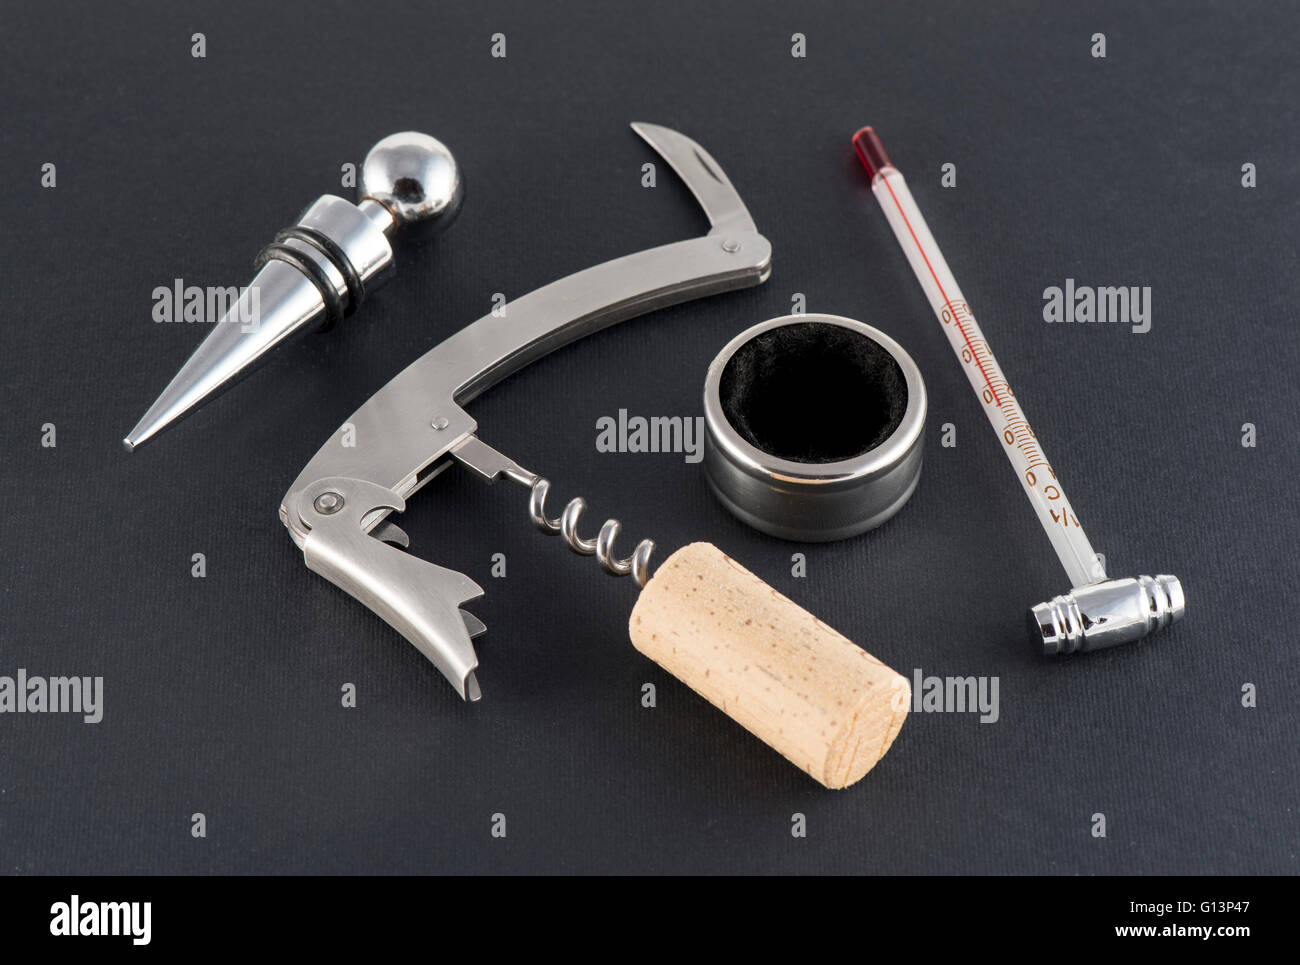 Corkscrew and accessories for wine on black background Stock Photo